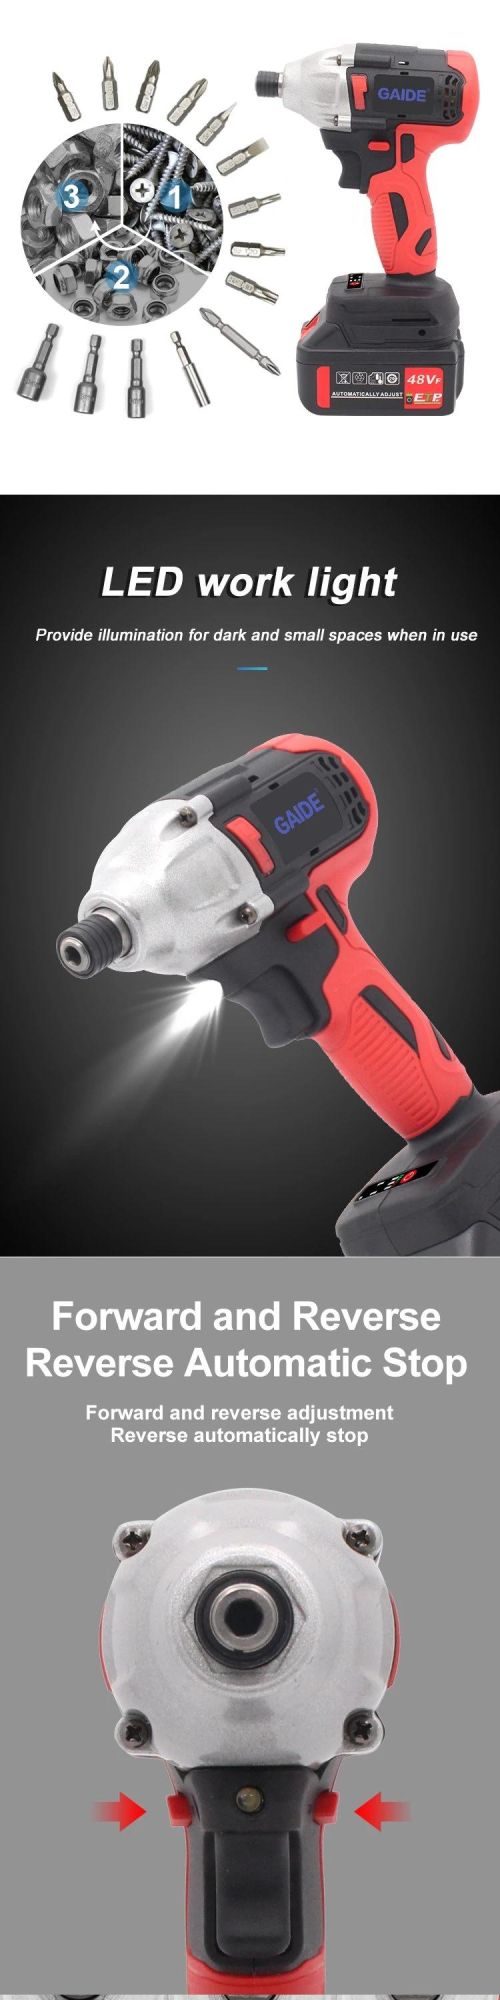 Gaide Strong Magnetic Hex Screwdriver